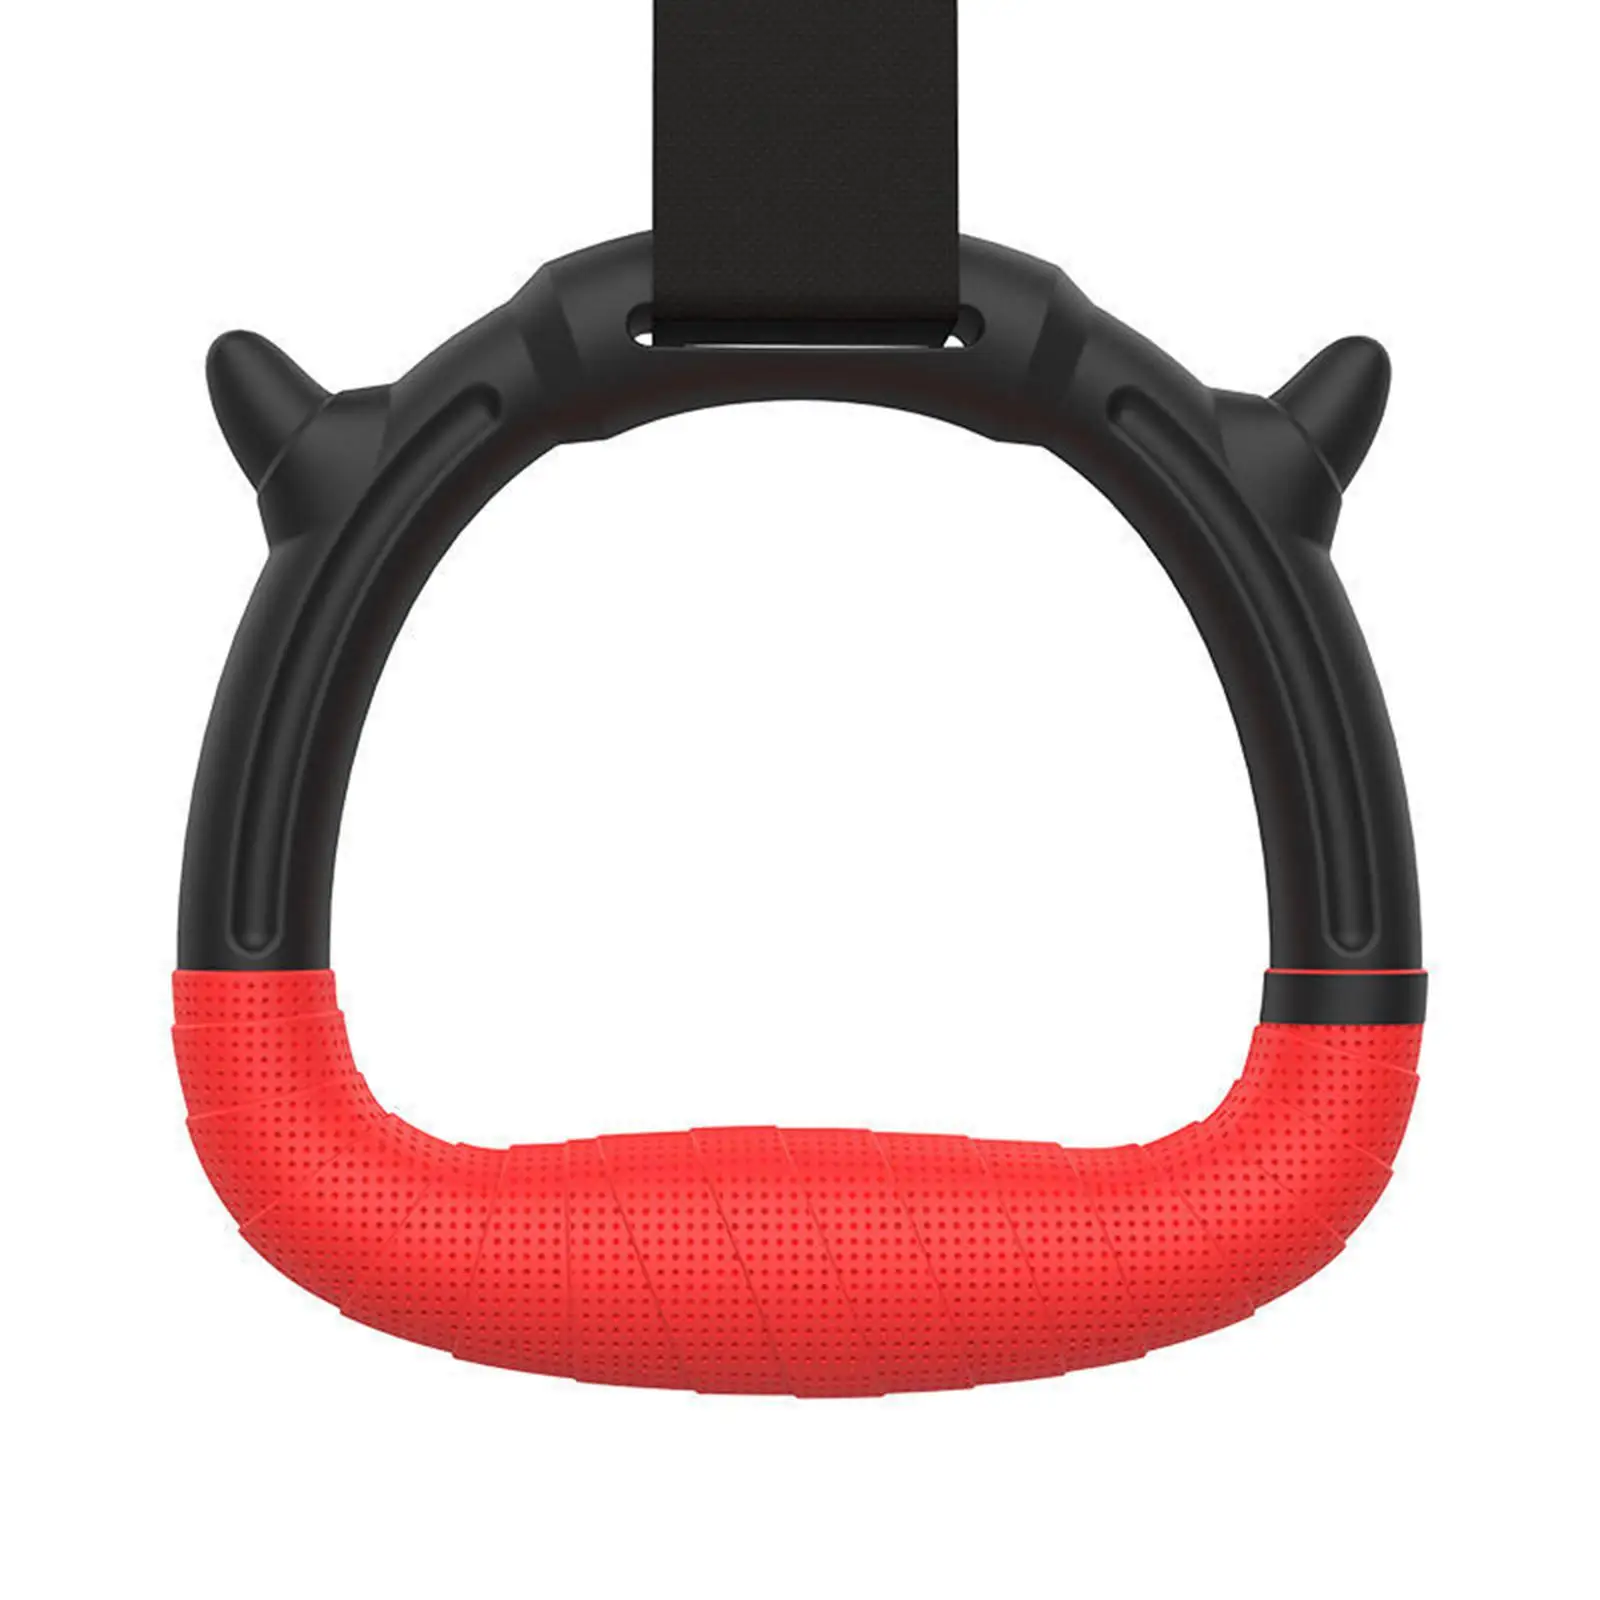 Gymnastics Rings Training Rings 661lbs Capacity Adjustable Straps Buckles Gym Ring for Full Body Workout Kids Adult Beginners